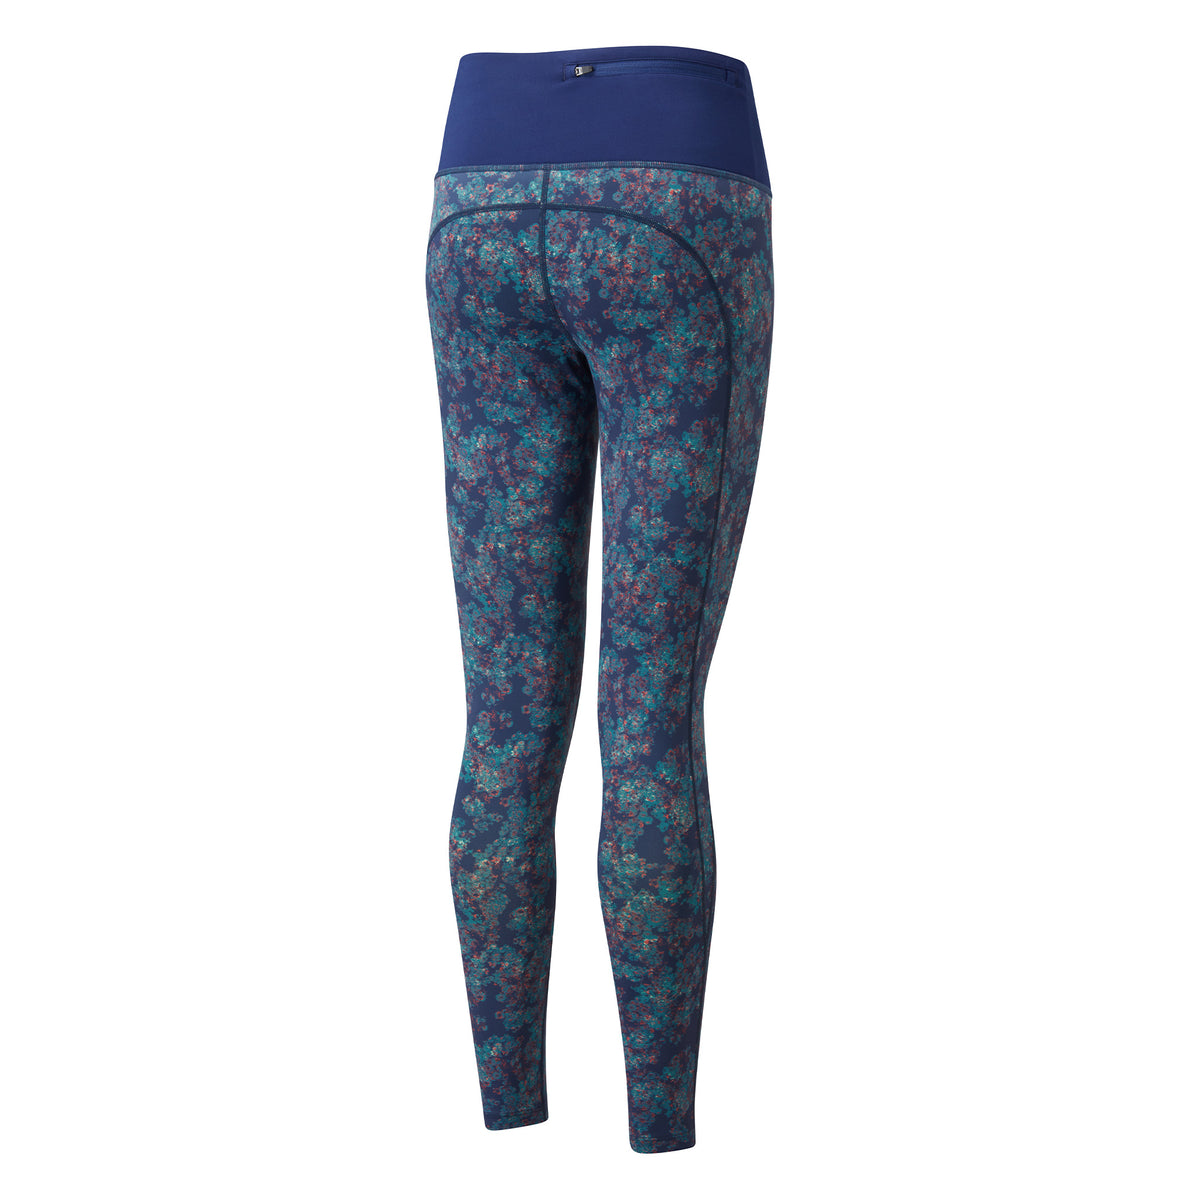 Ronhill Womens Life Tights: Deep Blue/MicroFloral